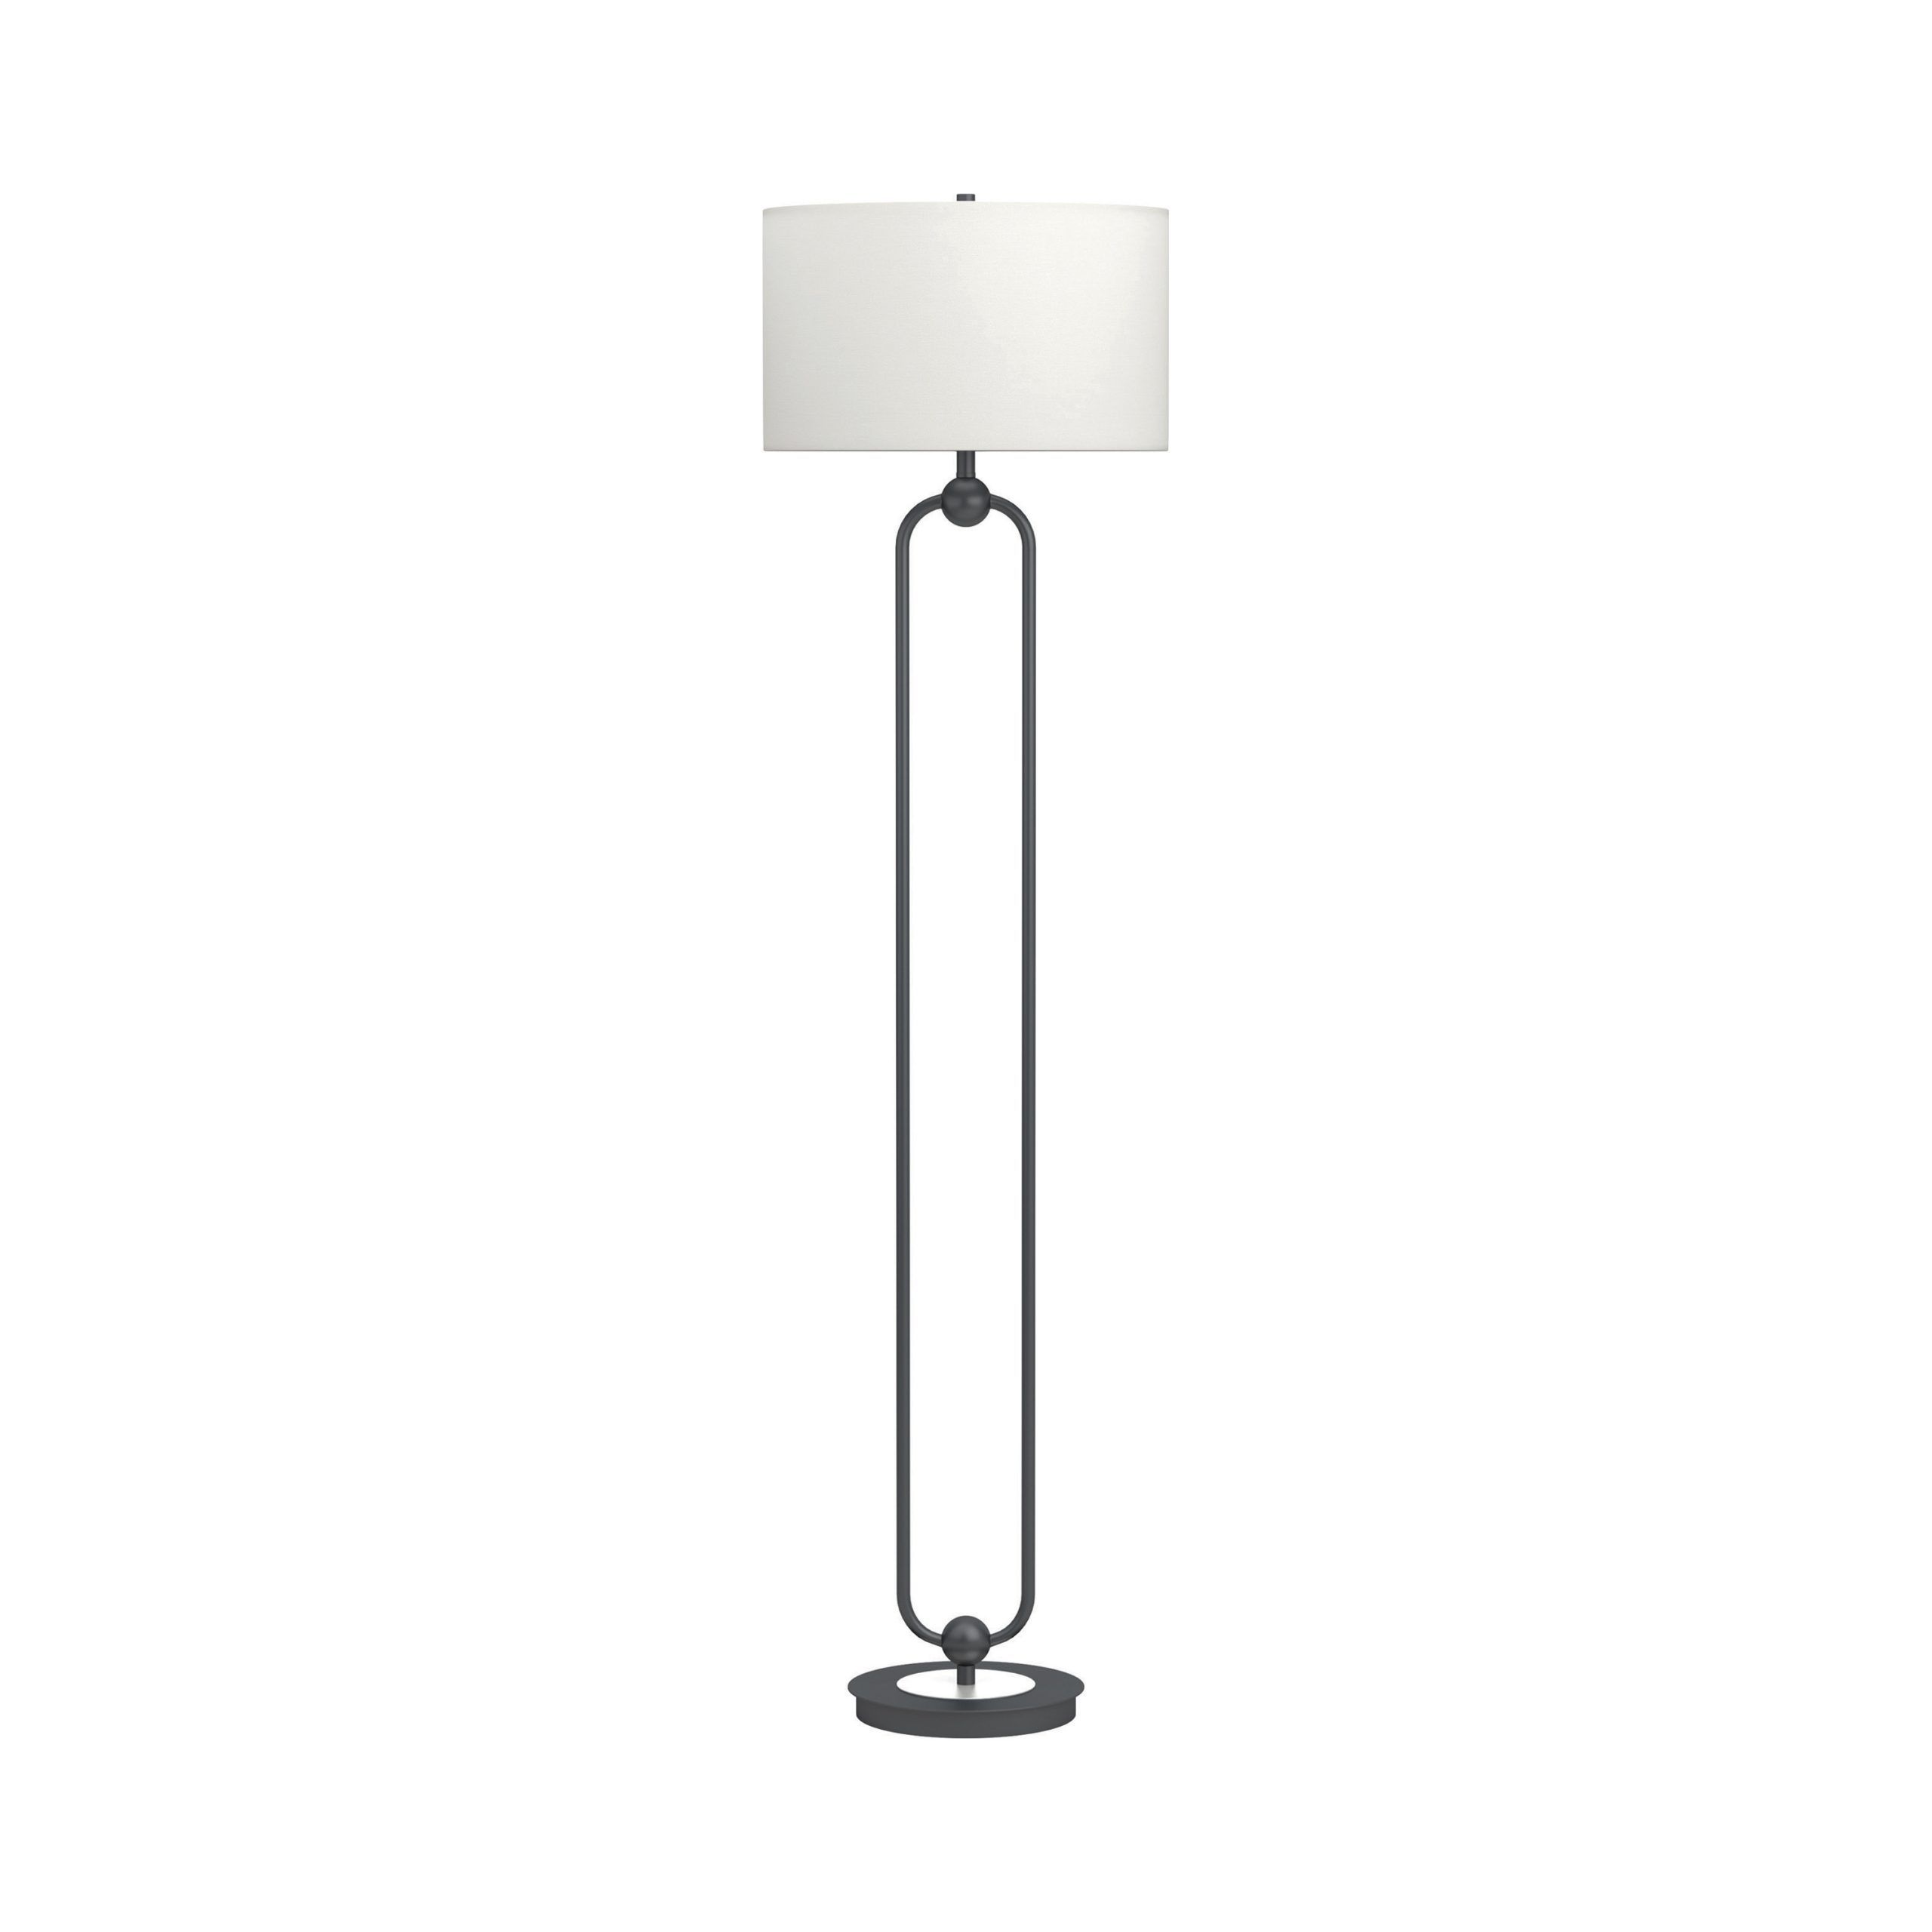 Drum Shade Floor Lamp White And Orb – Coaster Fine Furniture With White Shade Floor Lamps (View 9 of 15)